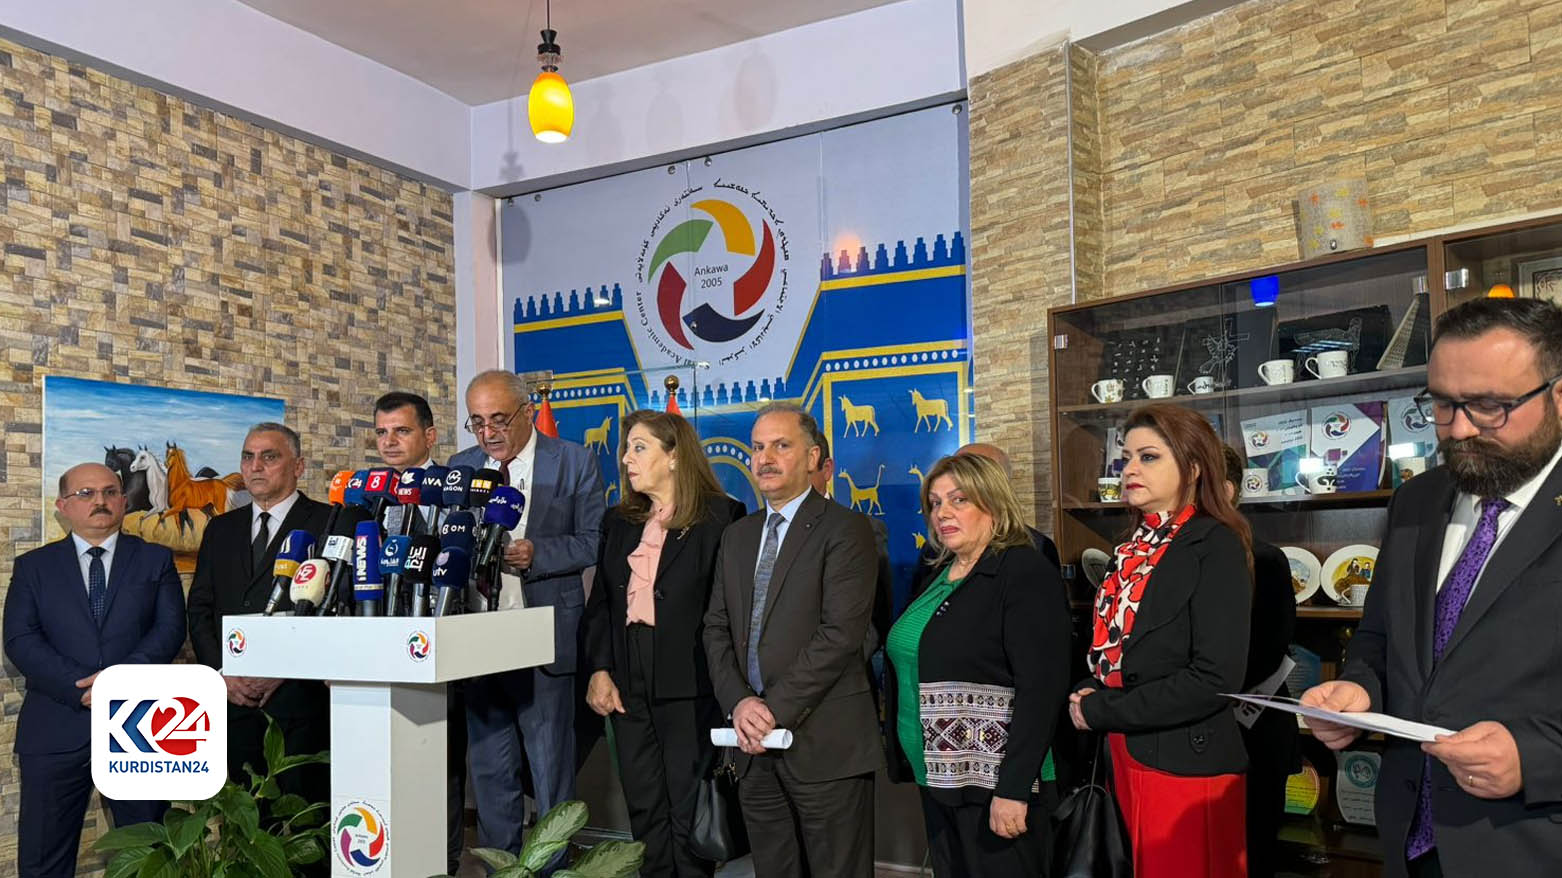 Joint statement released Monday March 18, representatives of various Christian communities, including Chaldeans, Assyrians, Syrians, and Armenians. (Photo: Kurdistan 24)